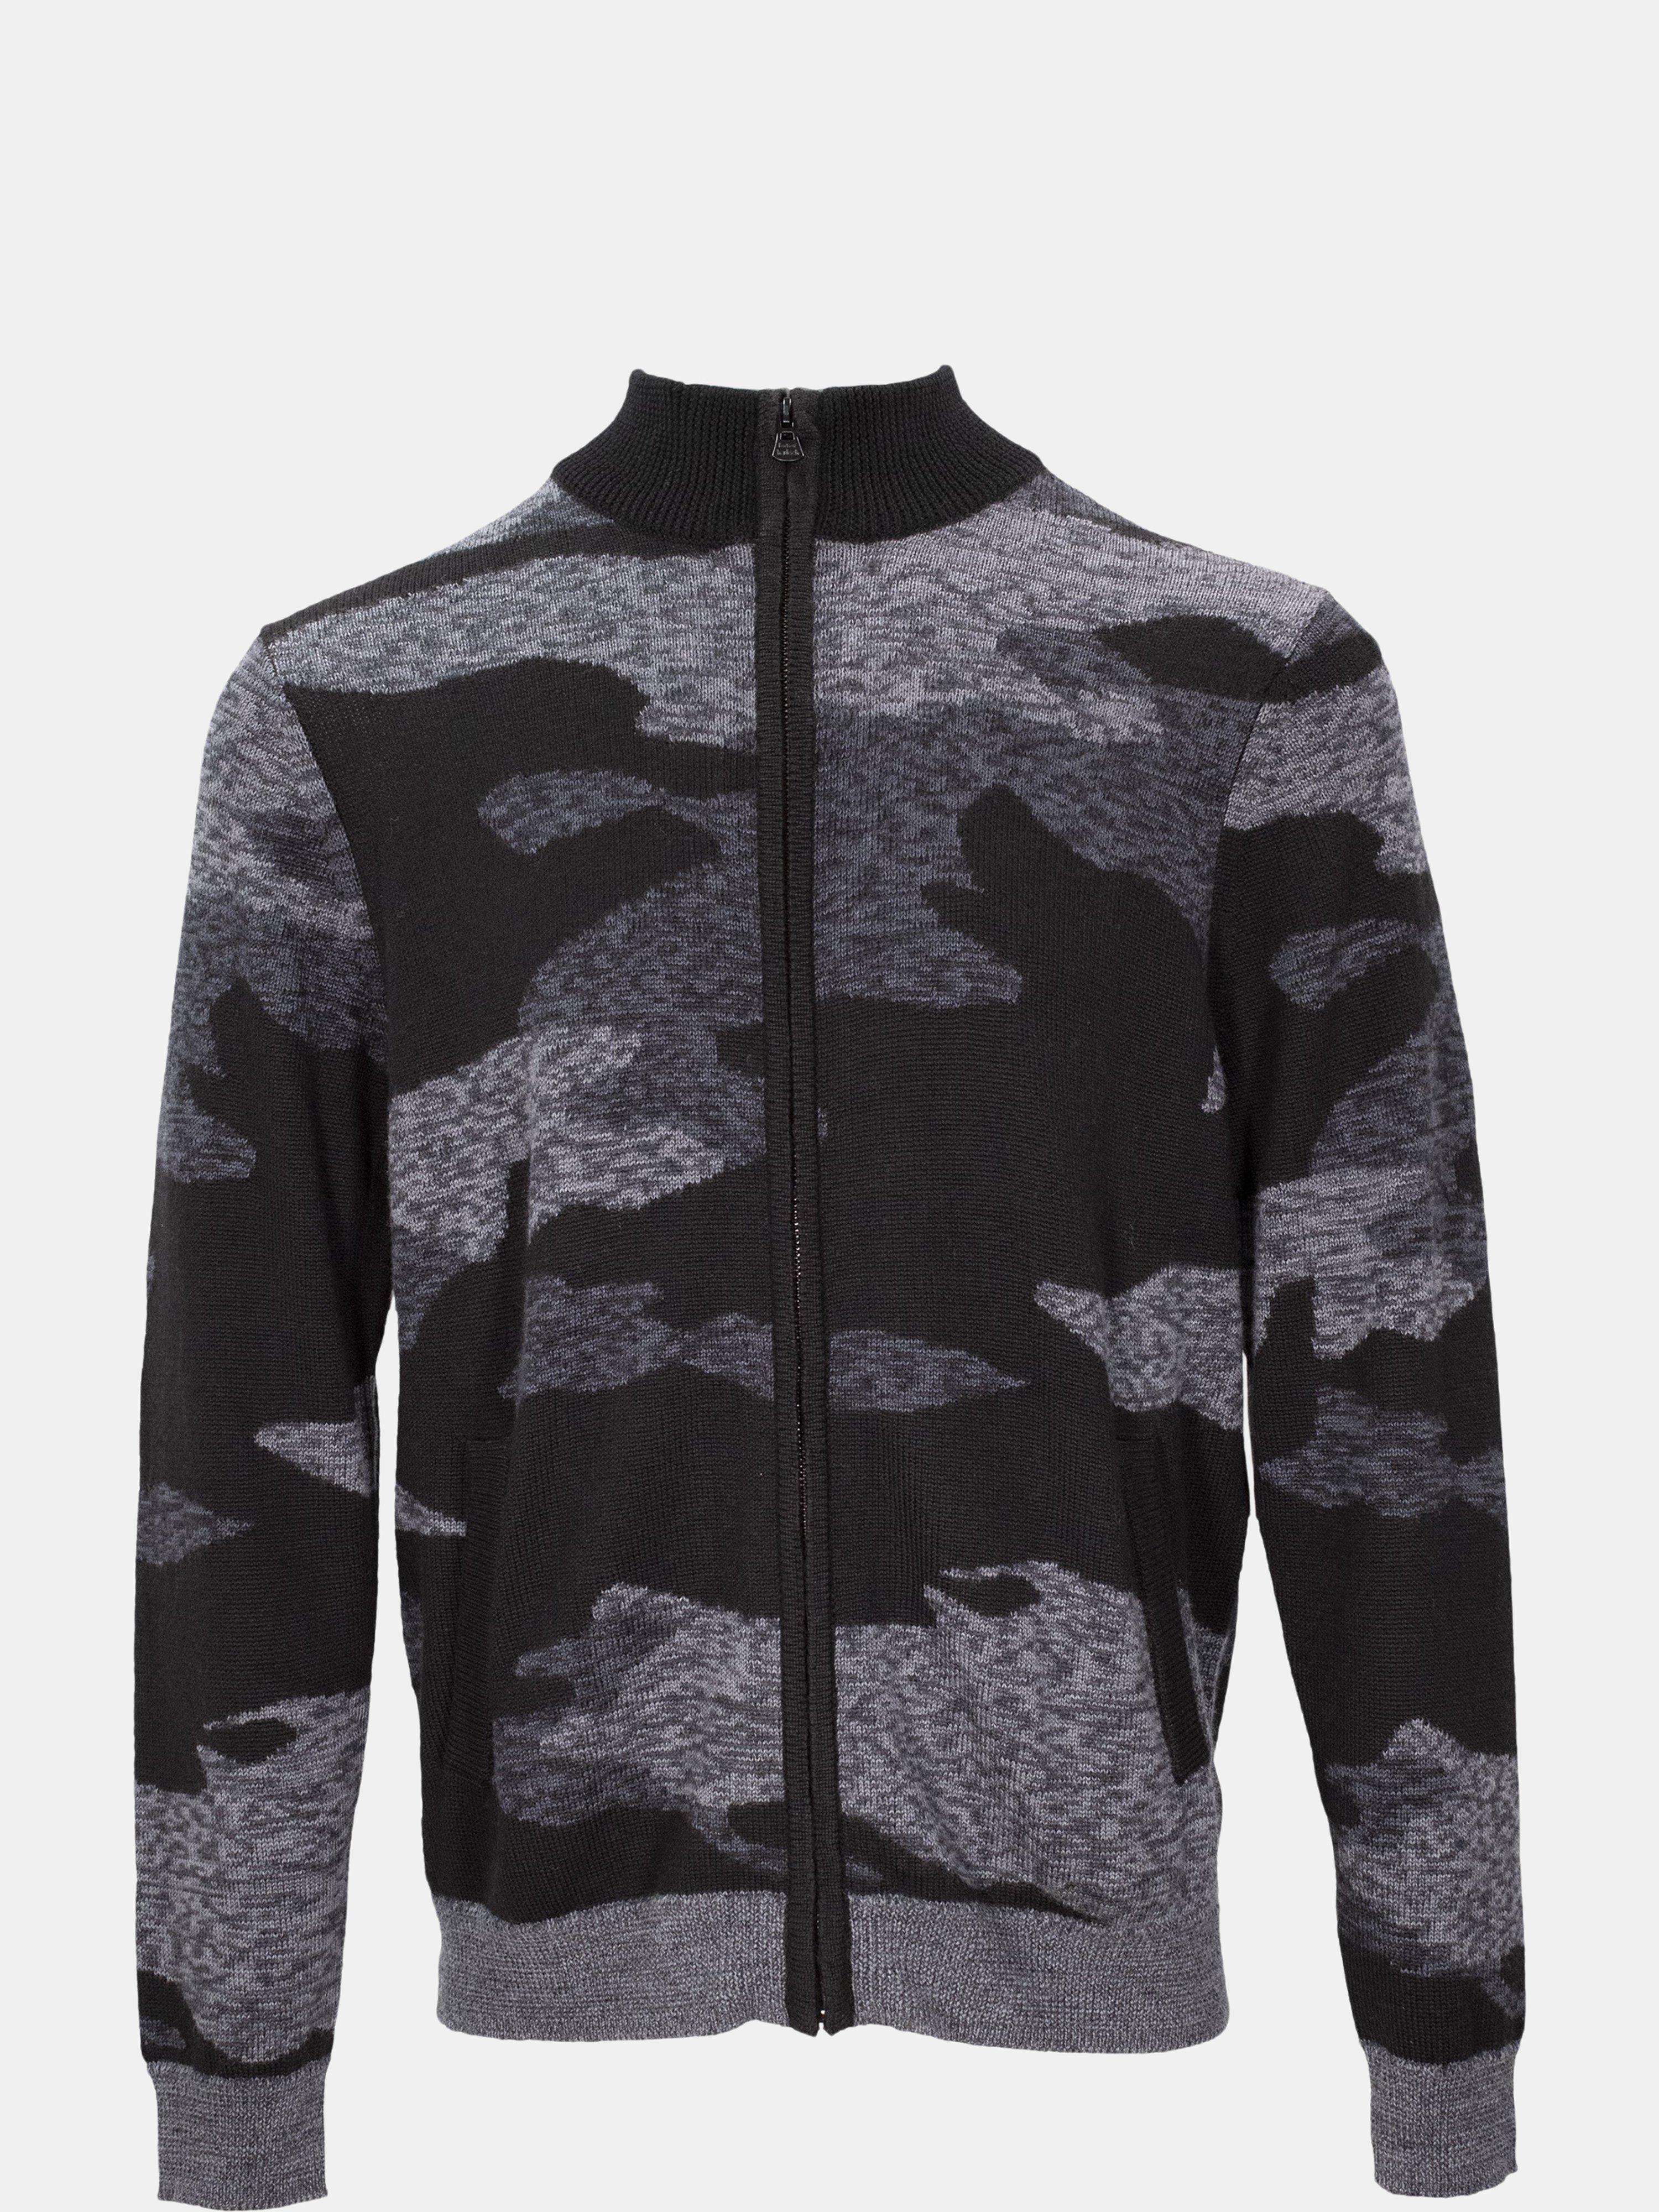 LORDS OF HARLECH LORDS OF HARLECH CARLO CHARCOAL CAMO FULL ZIP SWEATER